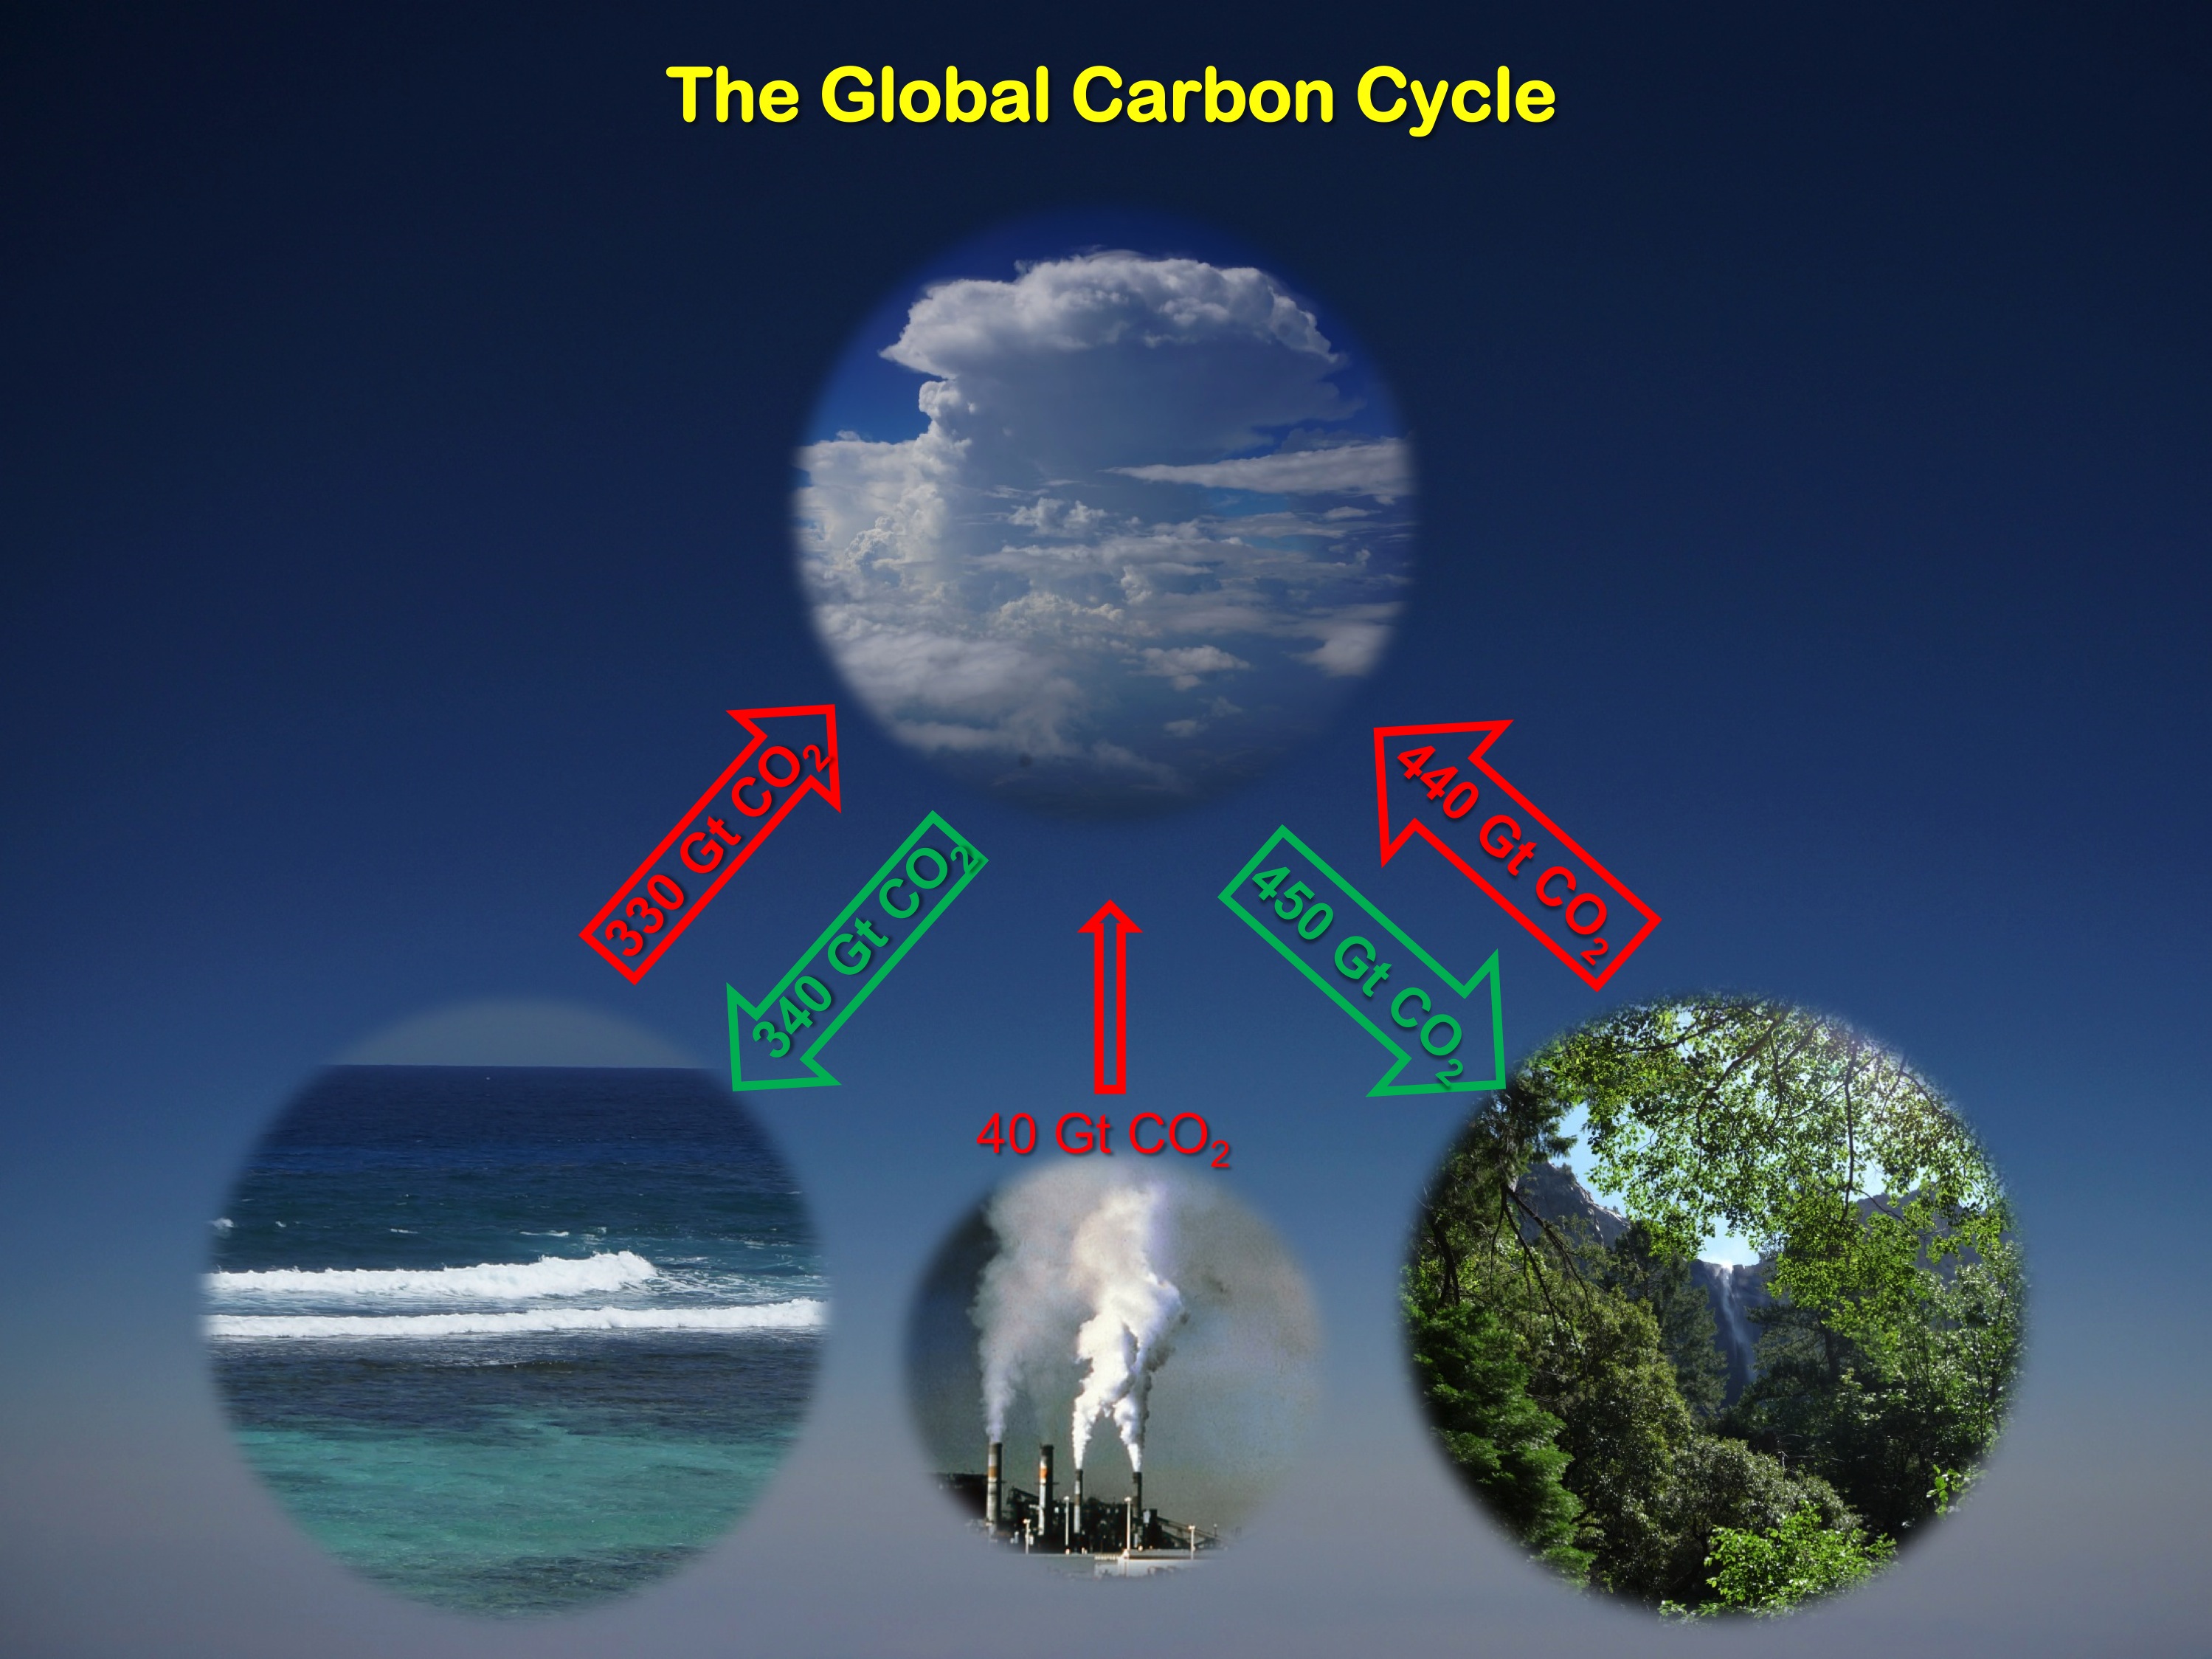 The ocean and land have continued to, over time, absorb about half of all carbon dioxide emissions.